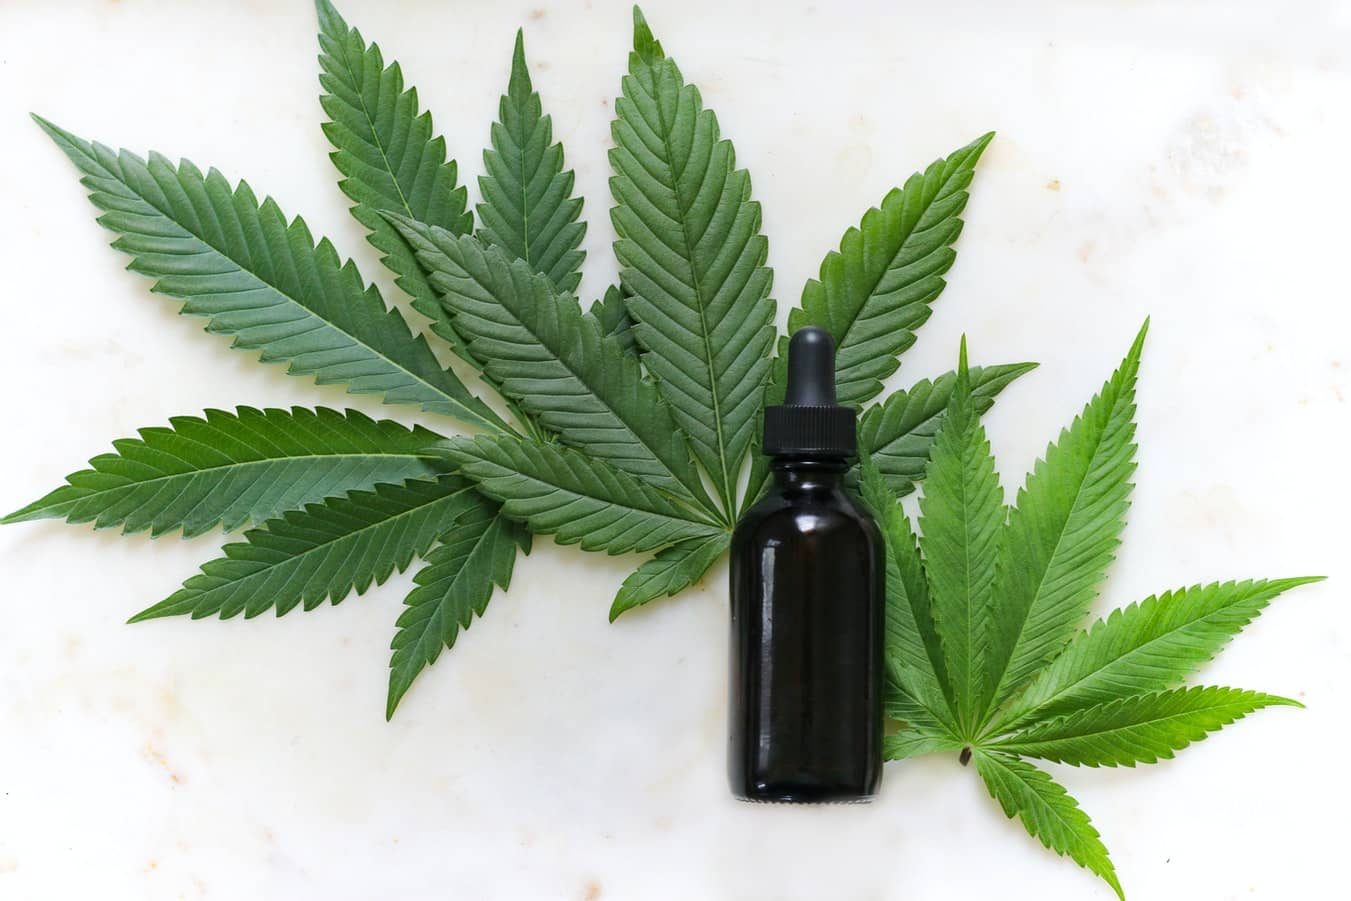 5 Things to Consider When Shopping For CBD Products